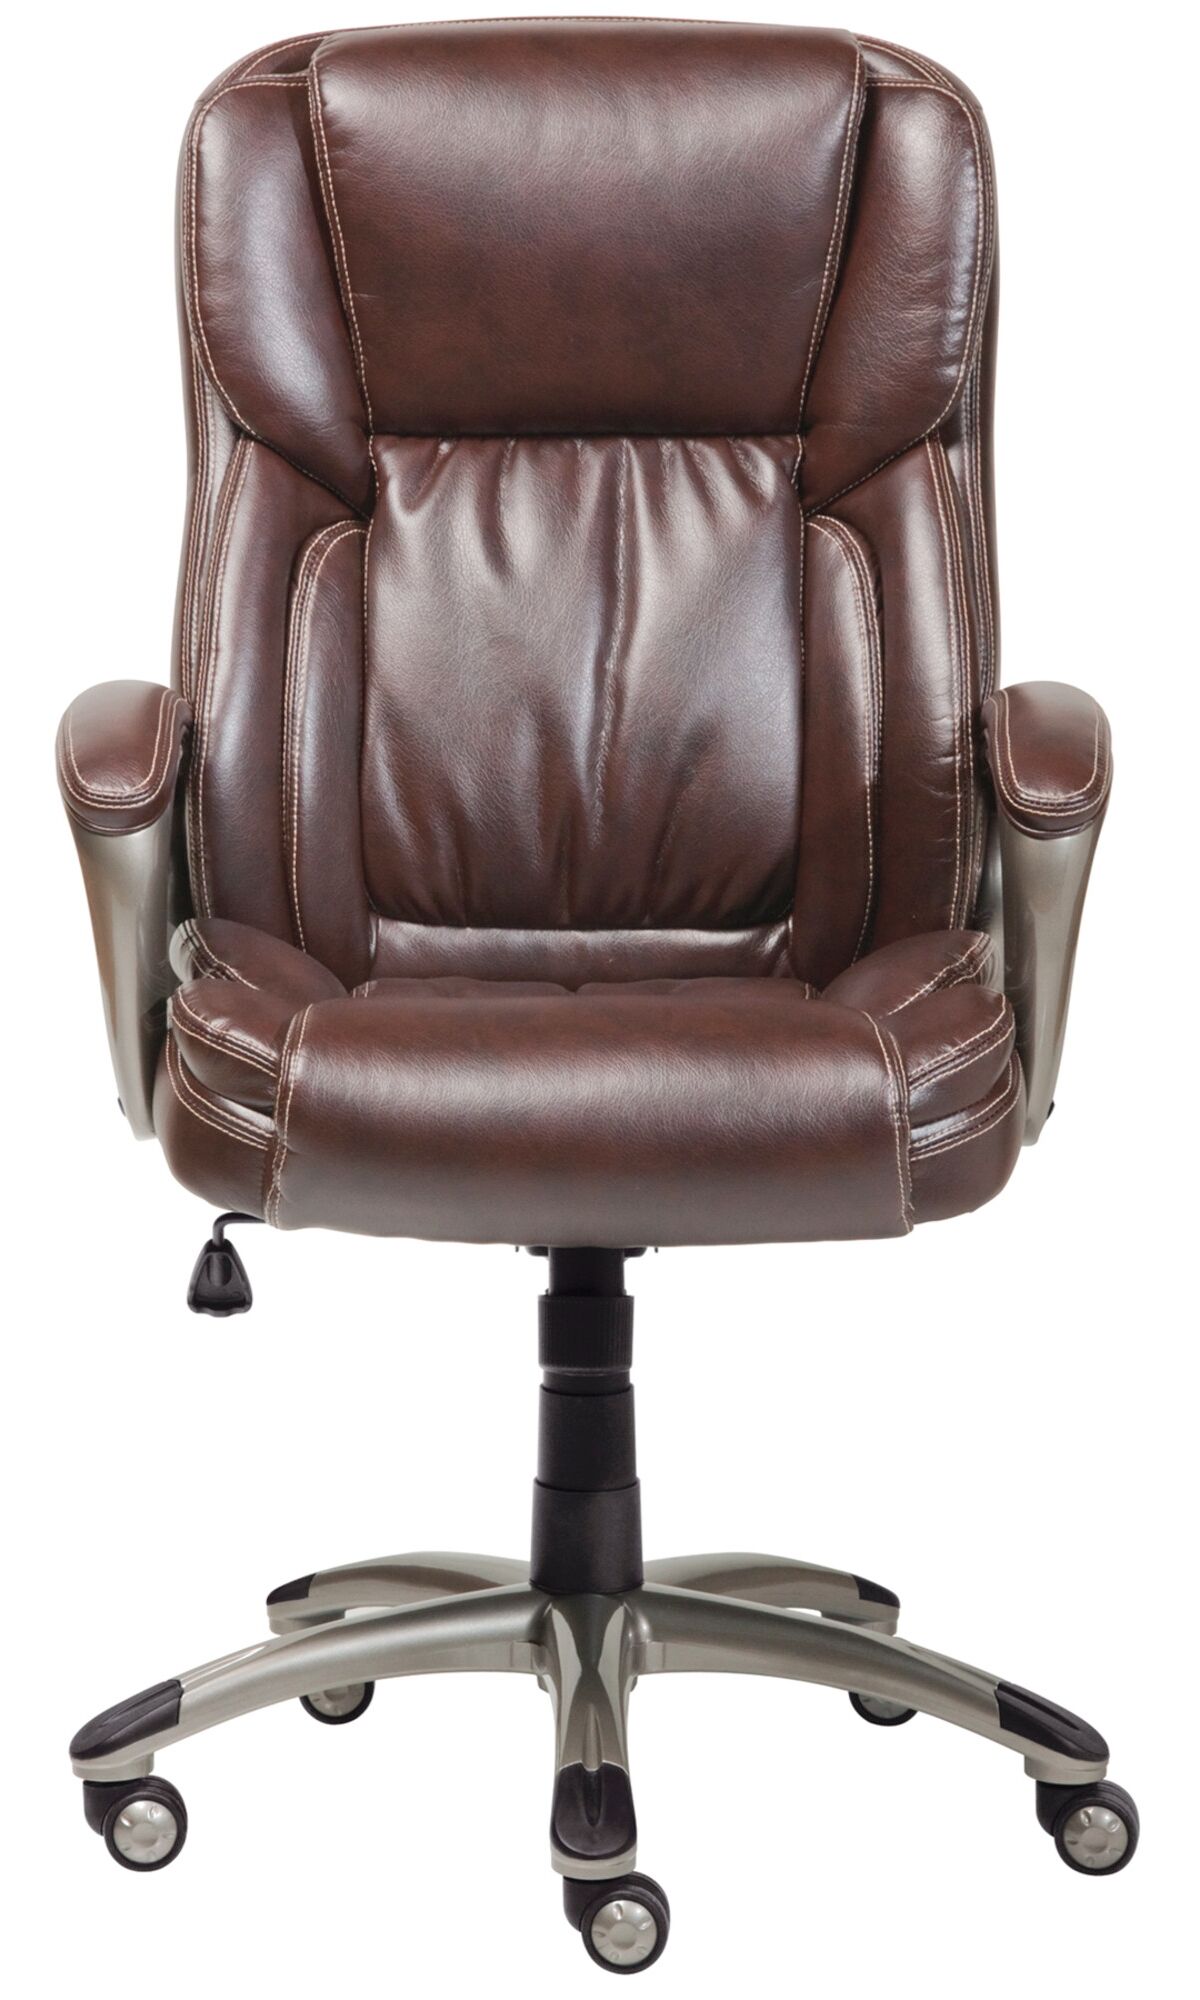 Serta Works Executive Office Chair - Brown